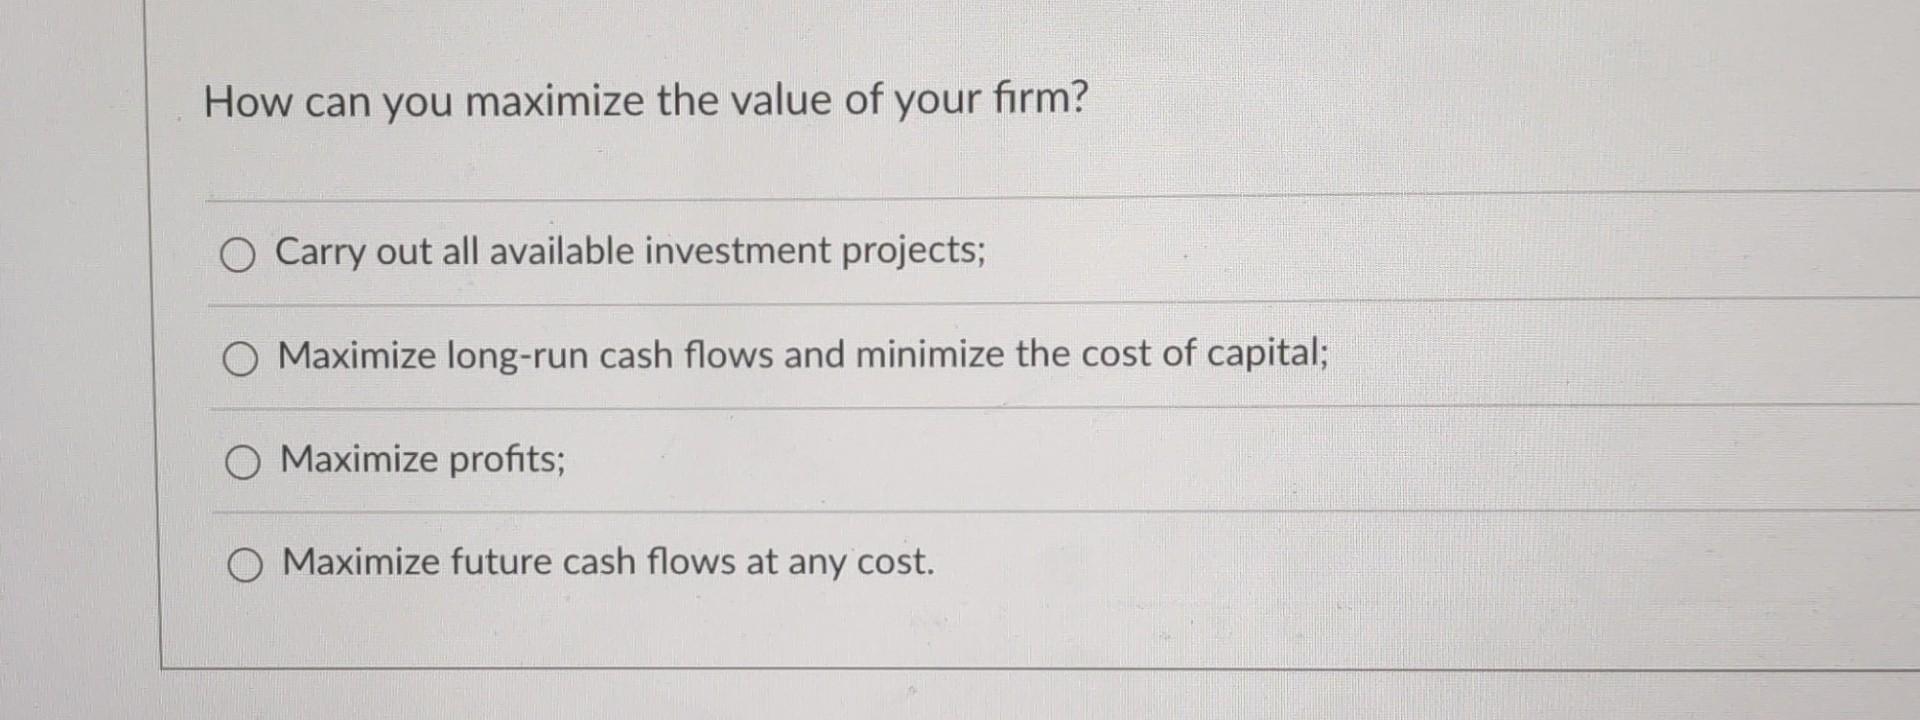 How can you maximize the value of your firm? O Carry out all available investment projects; Maximize long-run